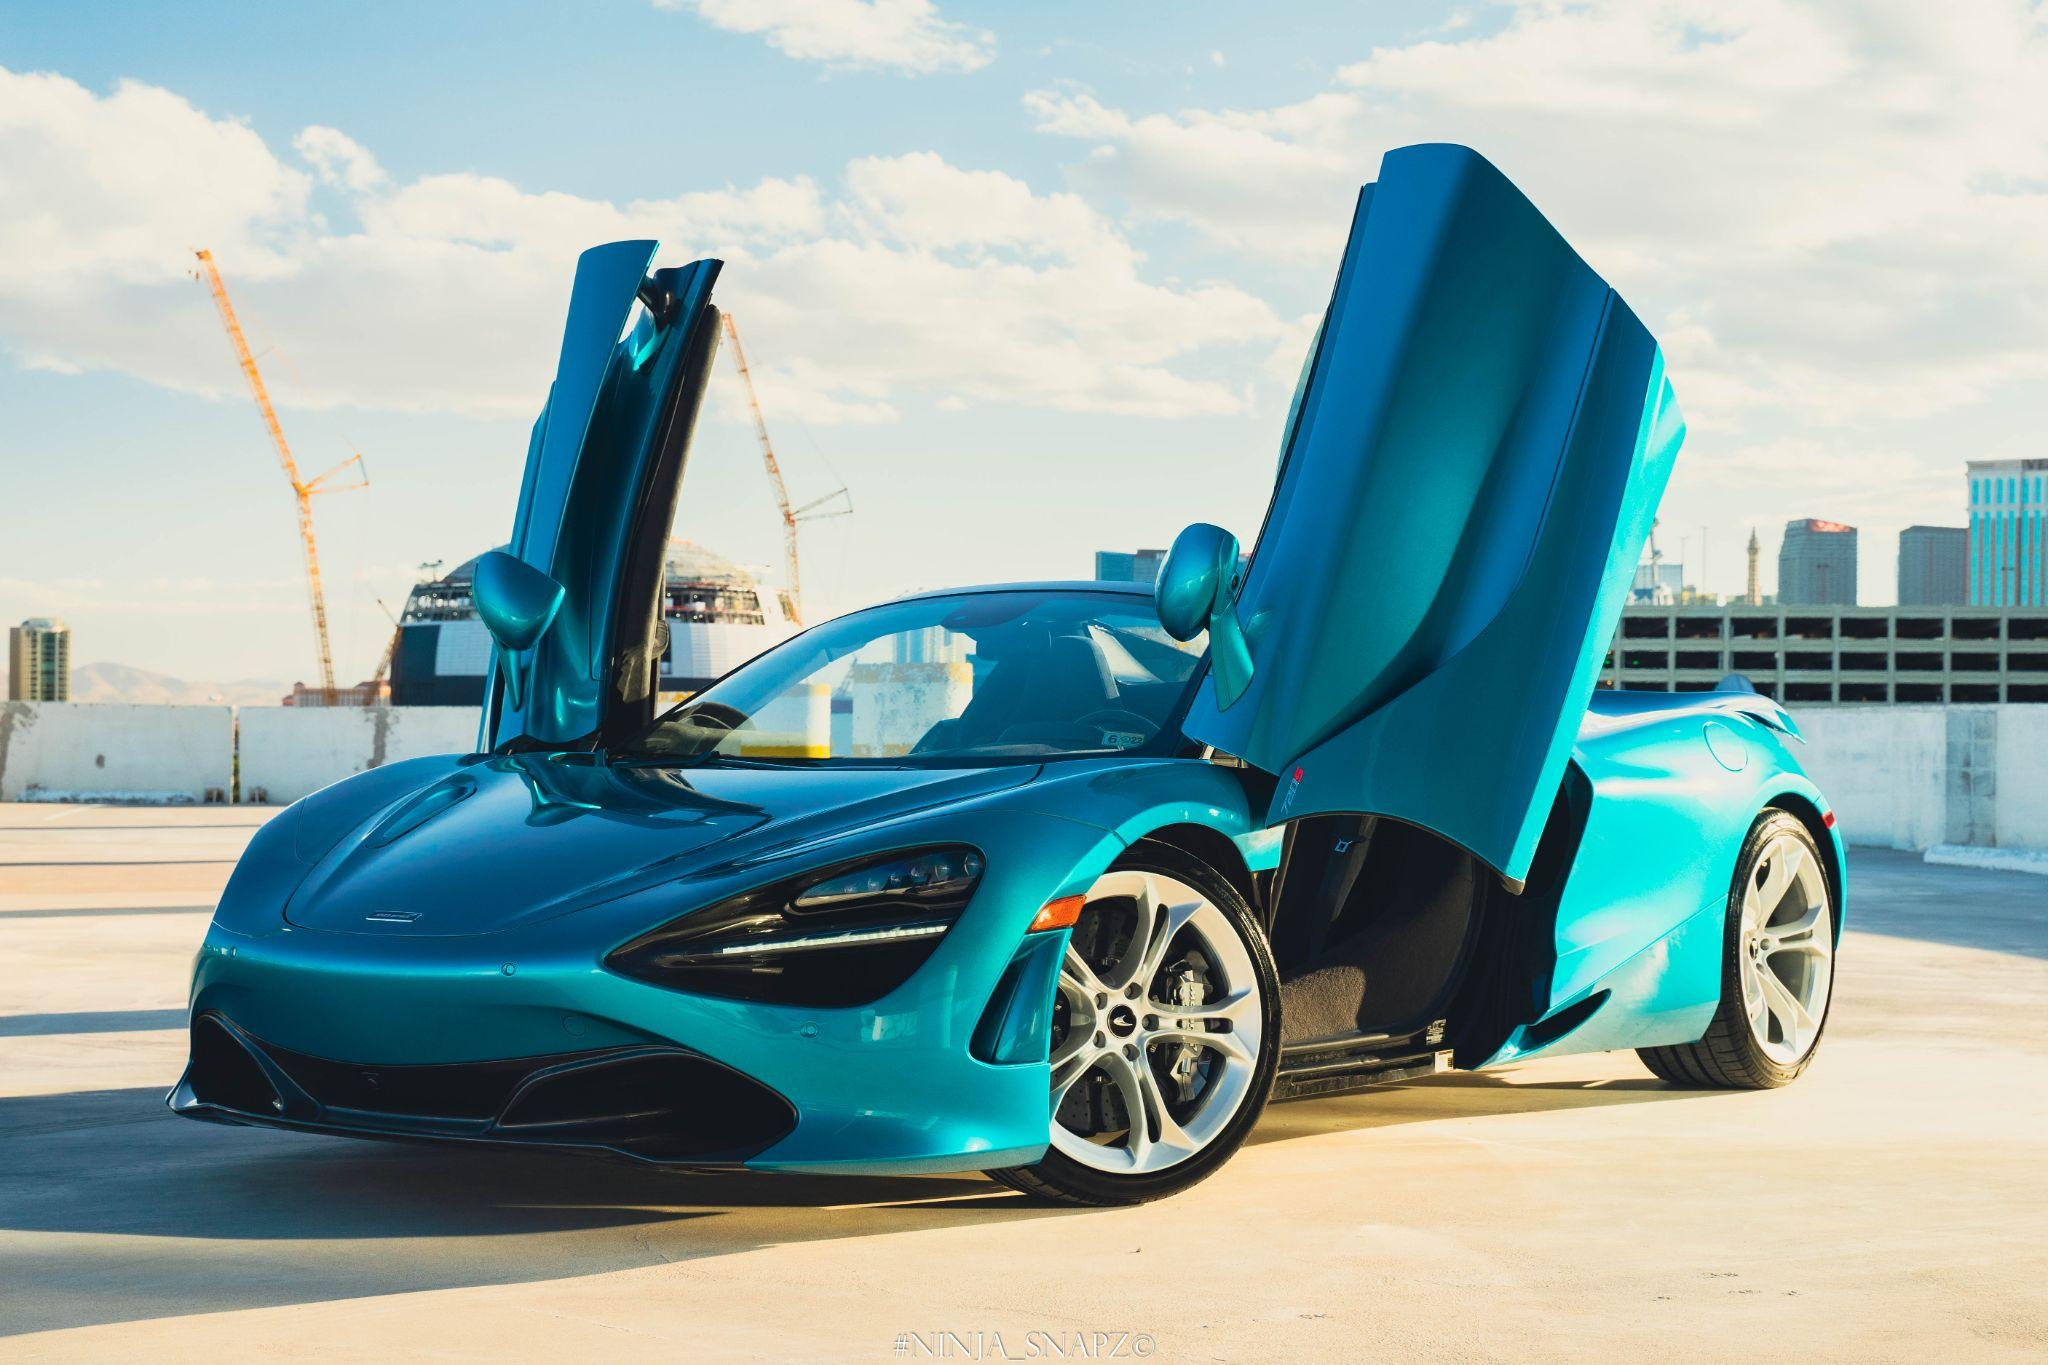  A blue luxury car with its doors open